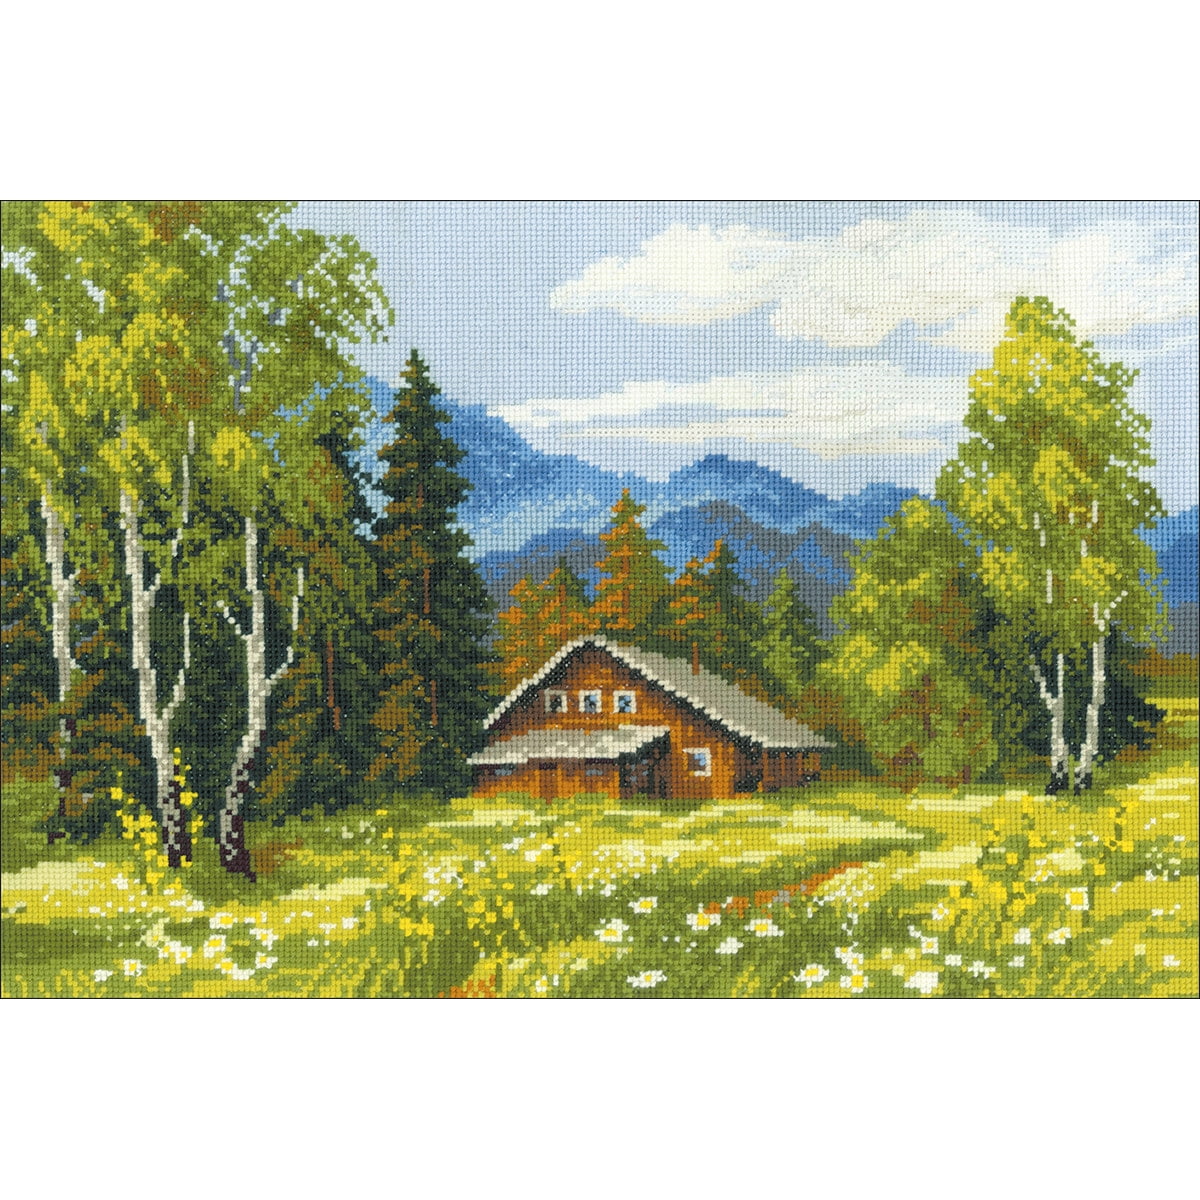 Swiss Chalet Counted Cross Stitch Kit 15"X10.5" 14 Count 499993818219